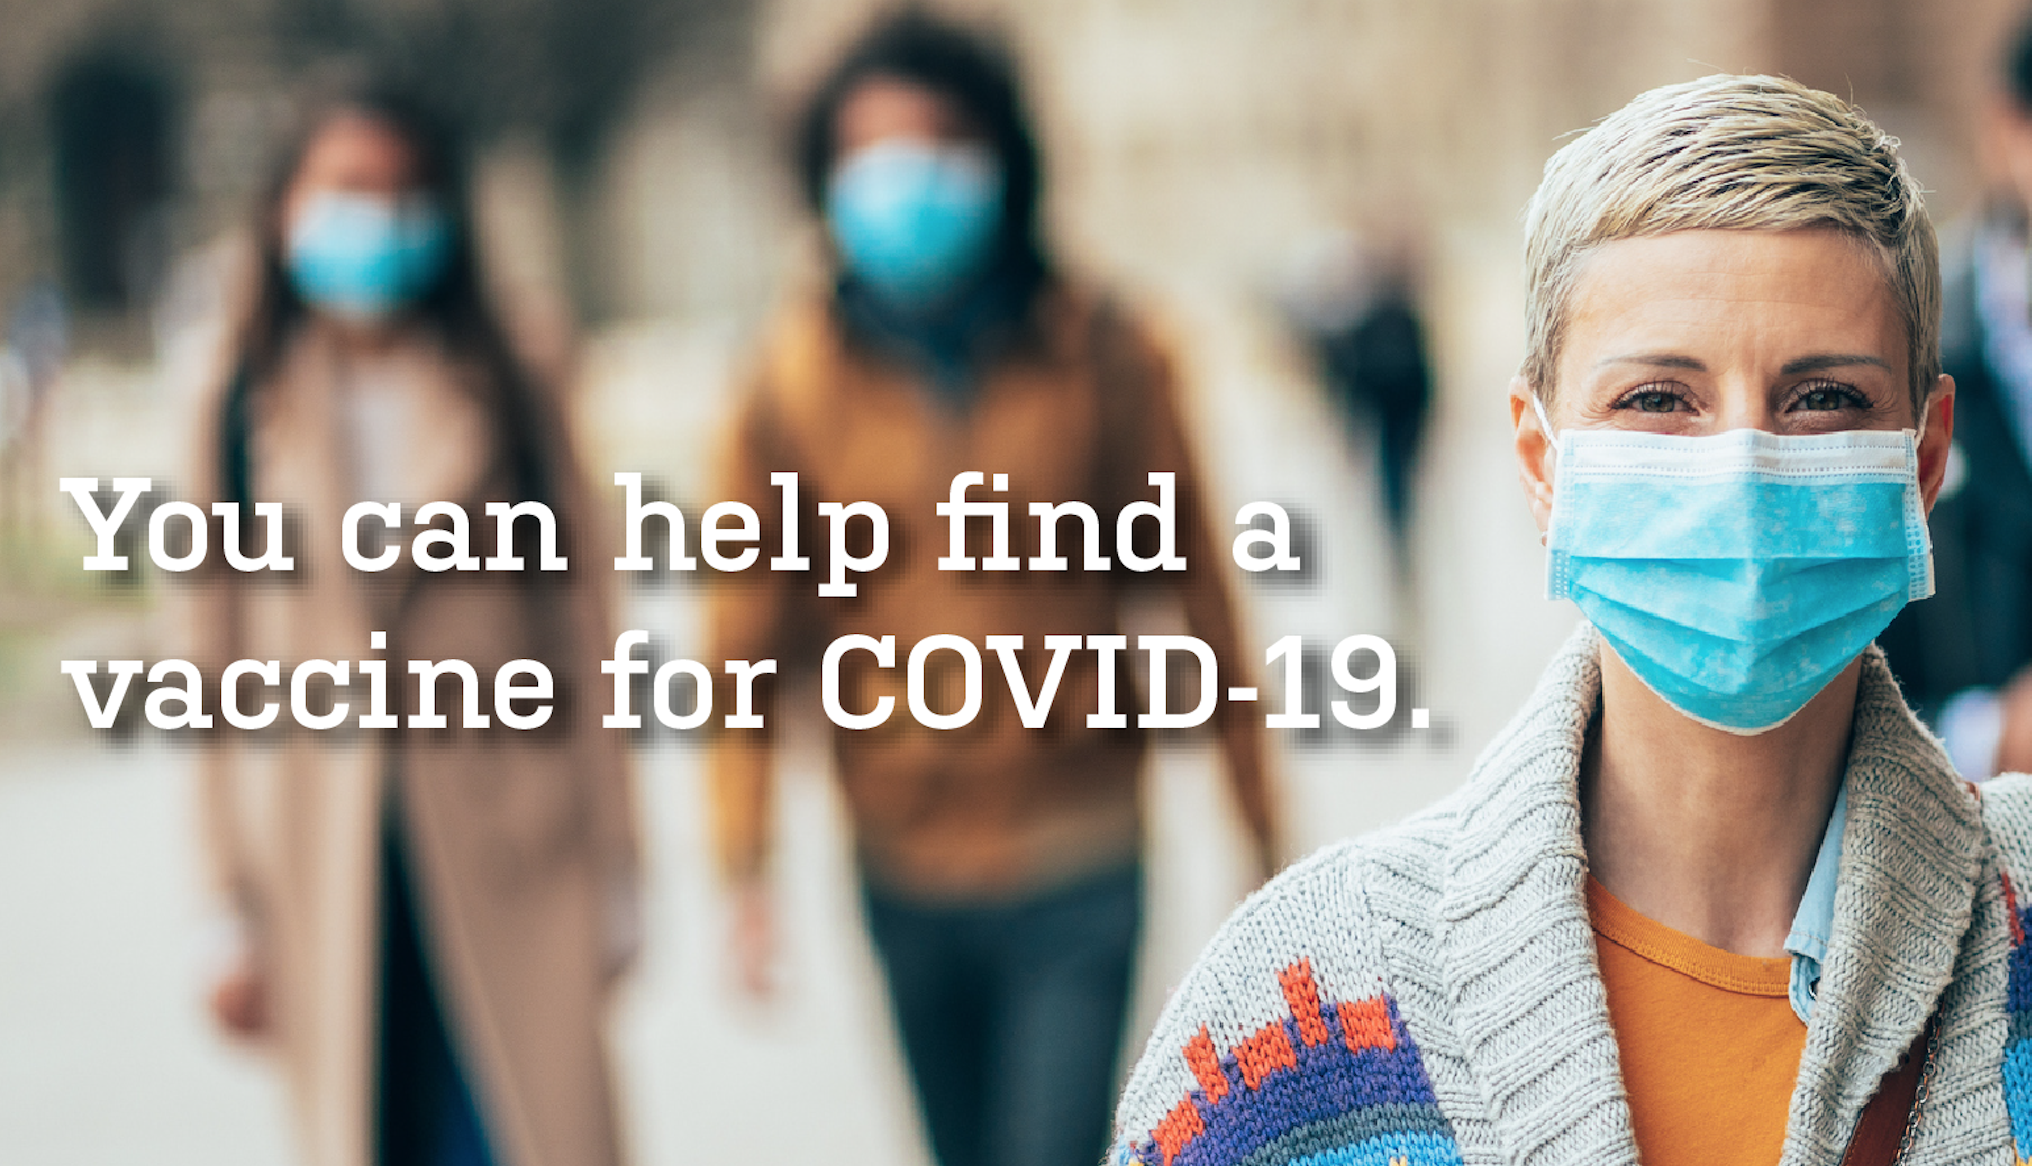 Check Out Our Newest Web Resource for COVID-19 Vaccine Information